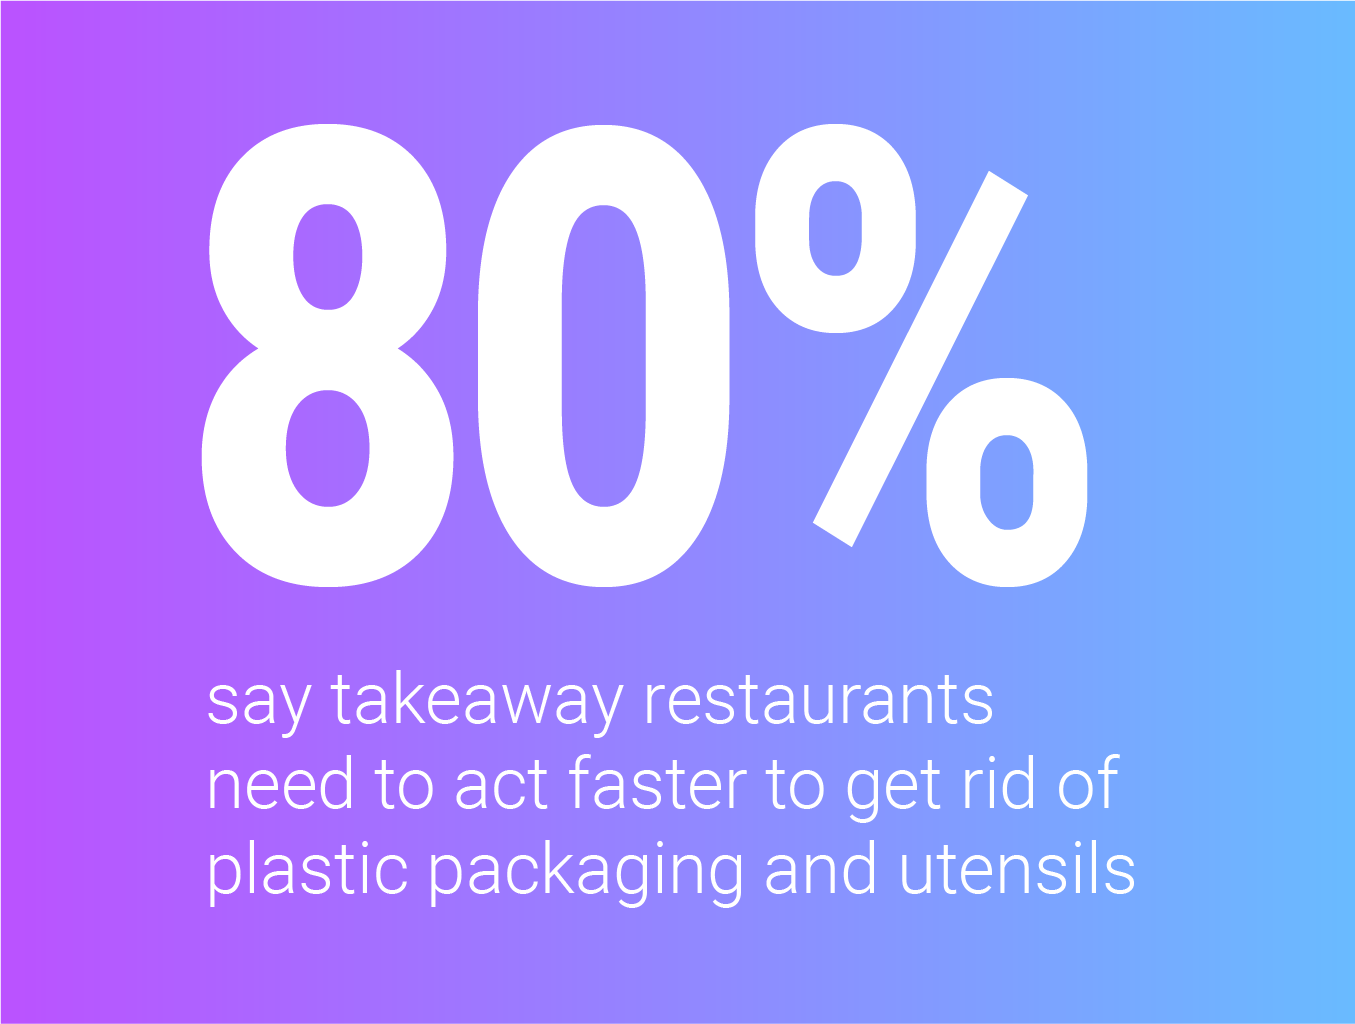 •	80% say takeaway restaurants need to act faster to get rid of plastic packaging and utensils